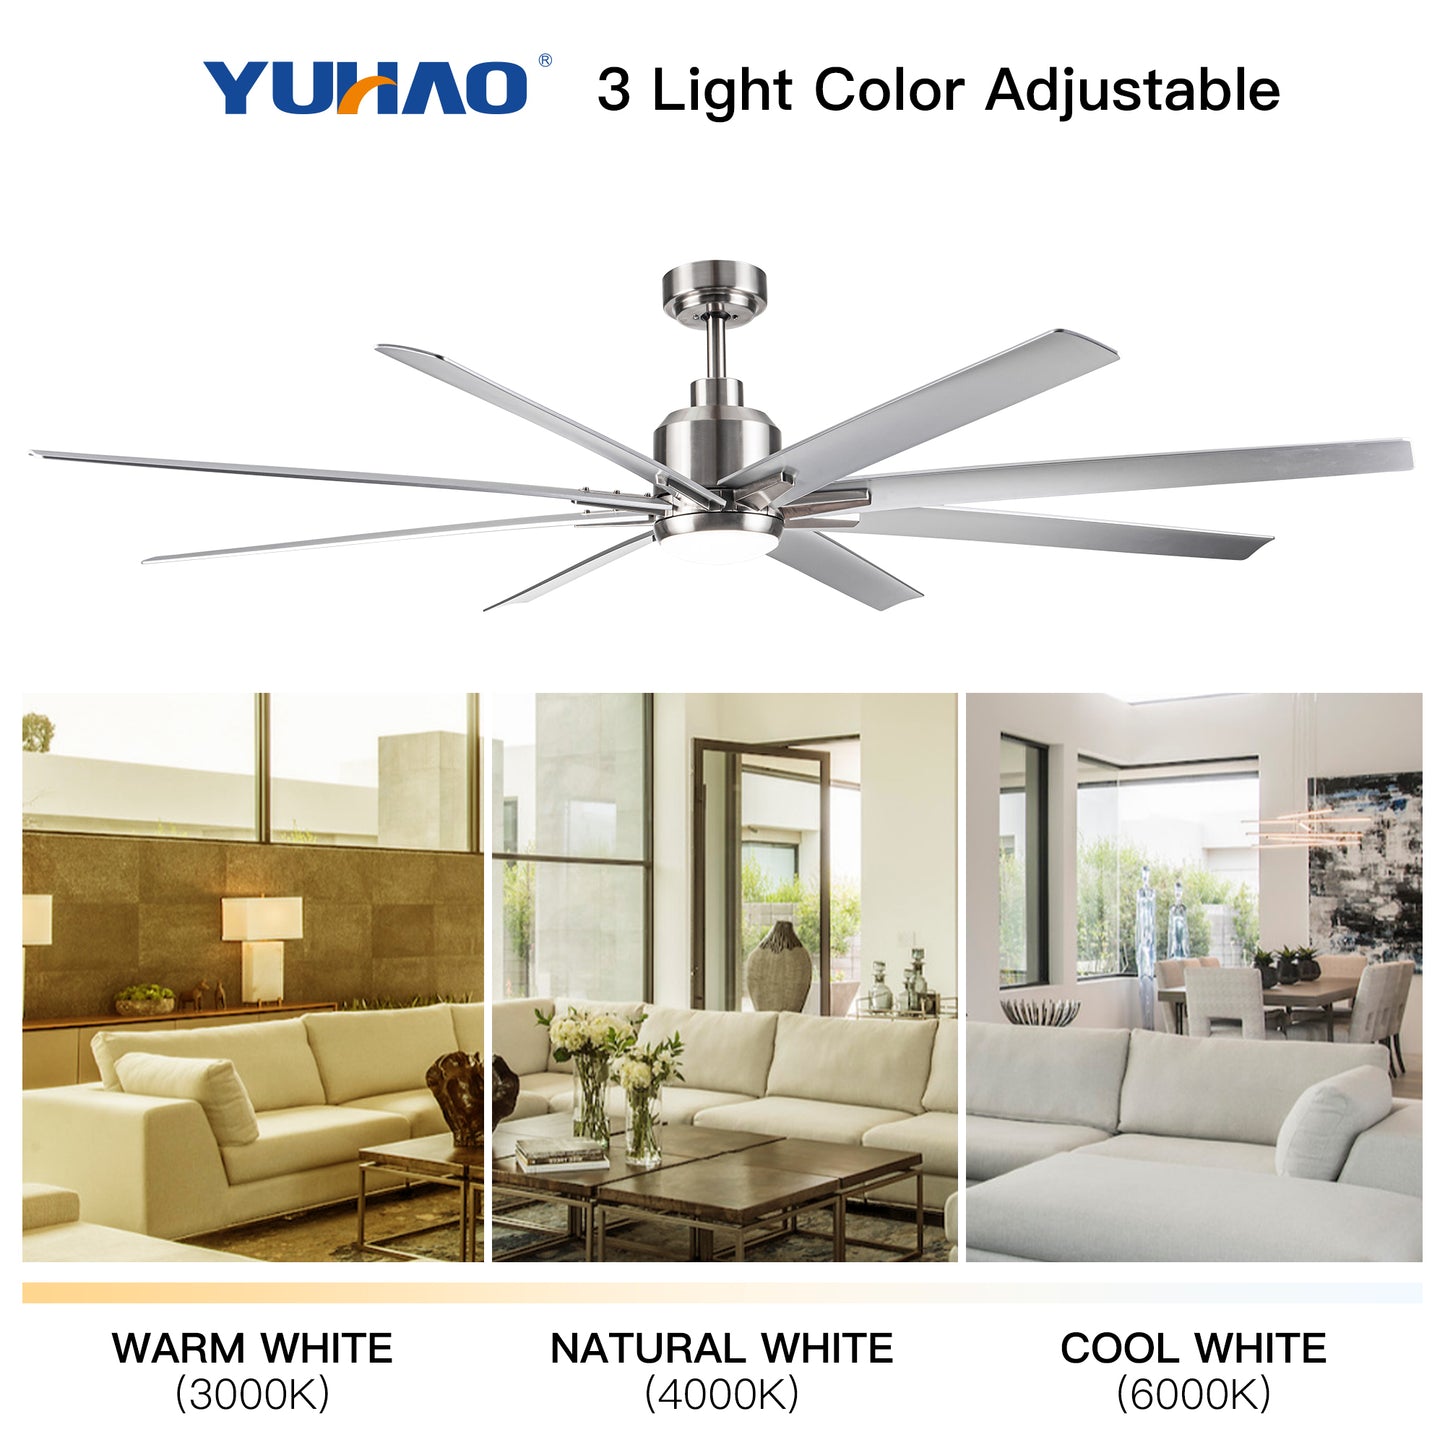 72 Smart Ceiling Fan with Silver Blades and LED Light Kit in Brushed Nickel Finish